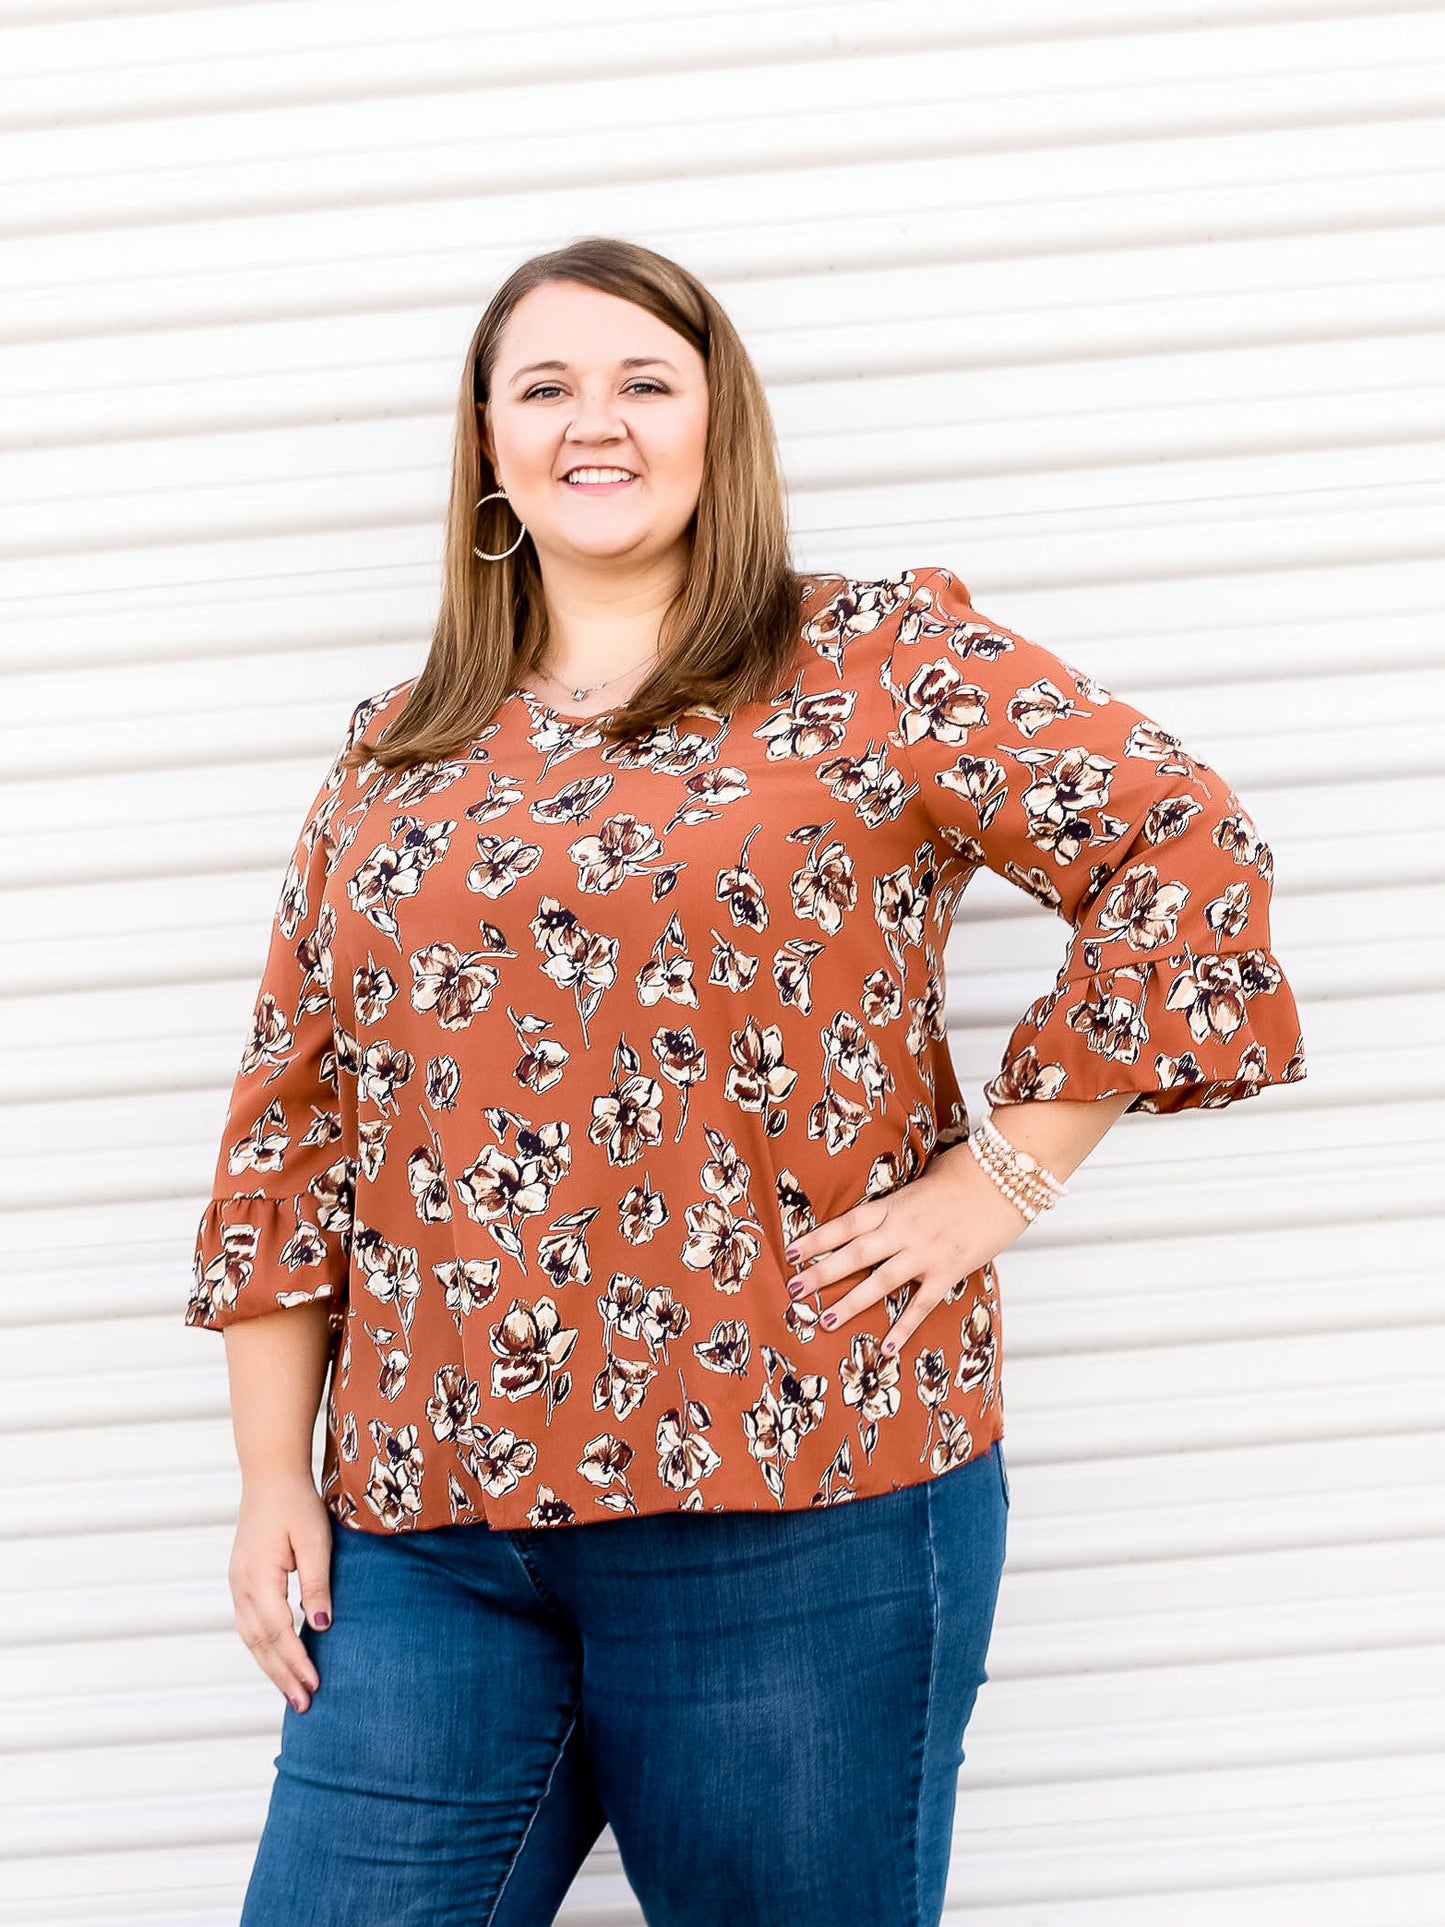 Rust colored blouse with 3/4 sleeves and floral pattern throughout.